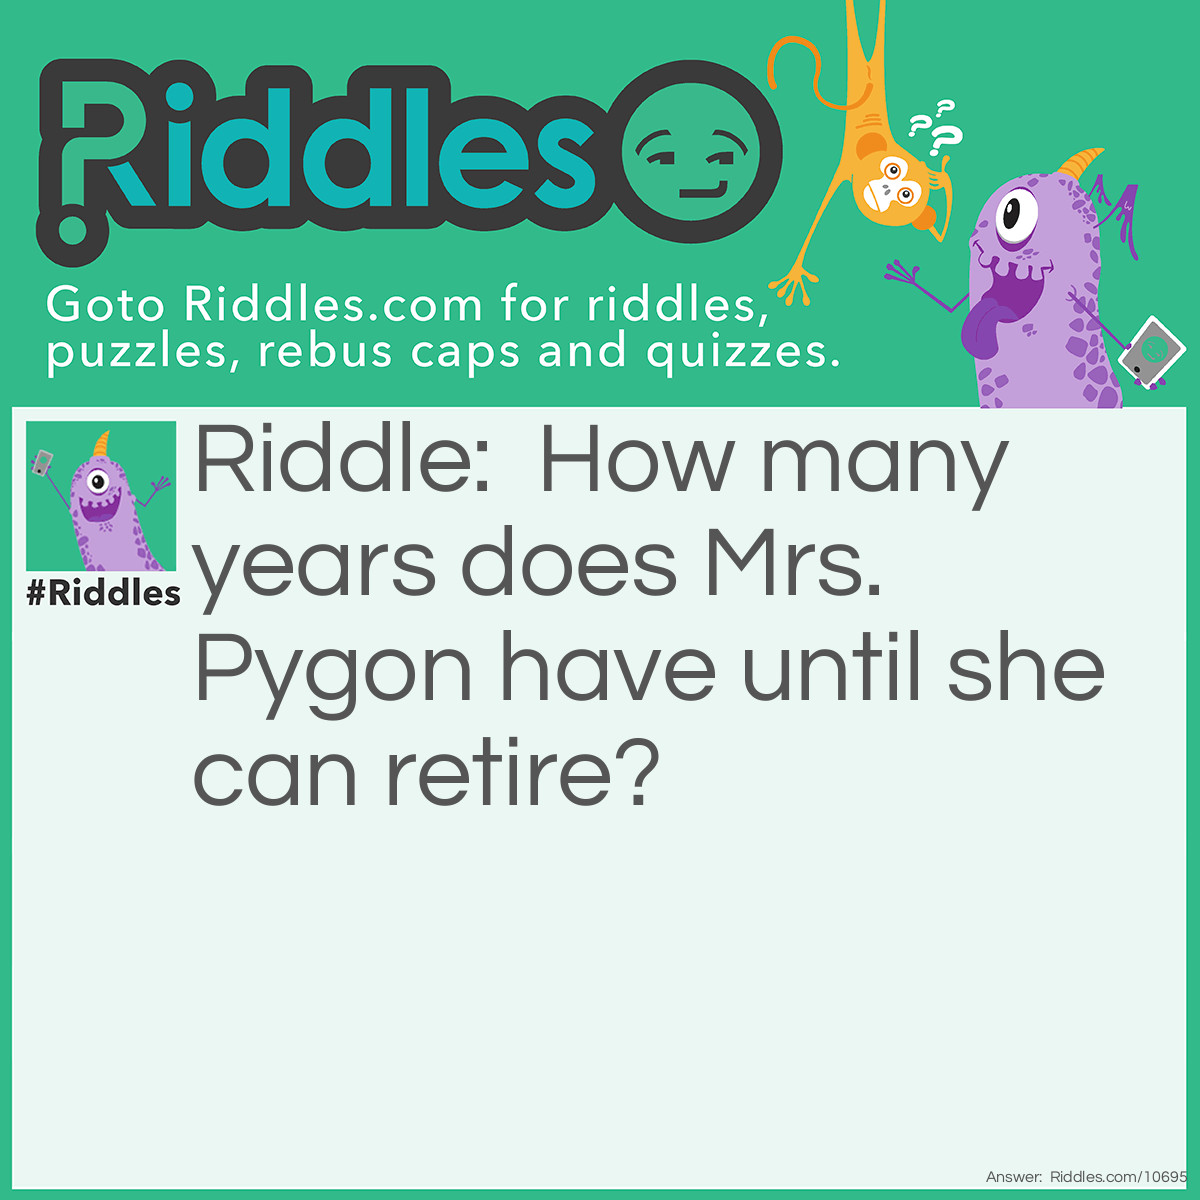 Riddle: How many years does Mrs. Pygon have until she can retire? Answer: 5 x 4 - 16.